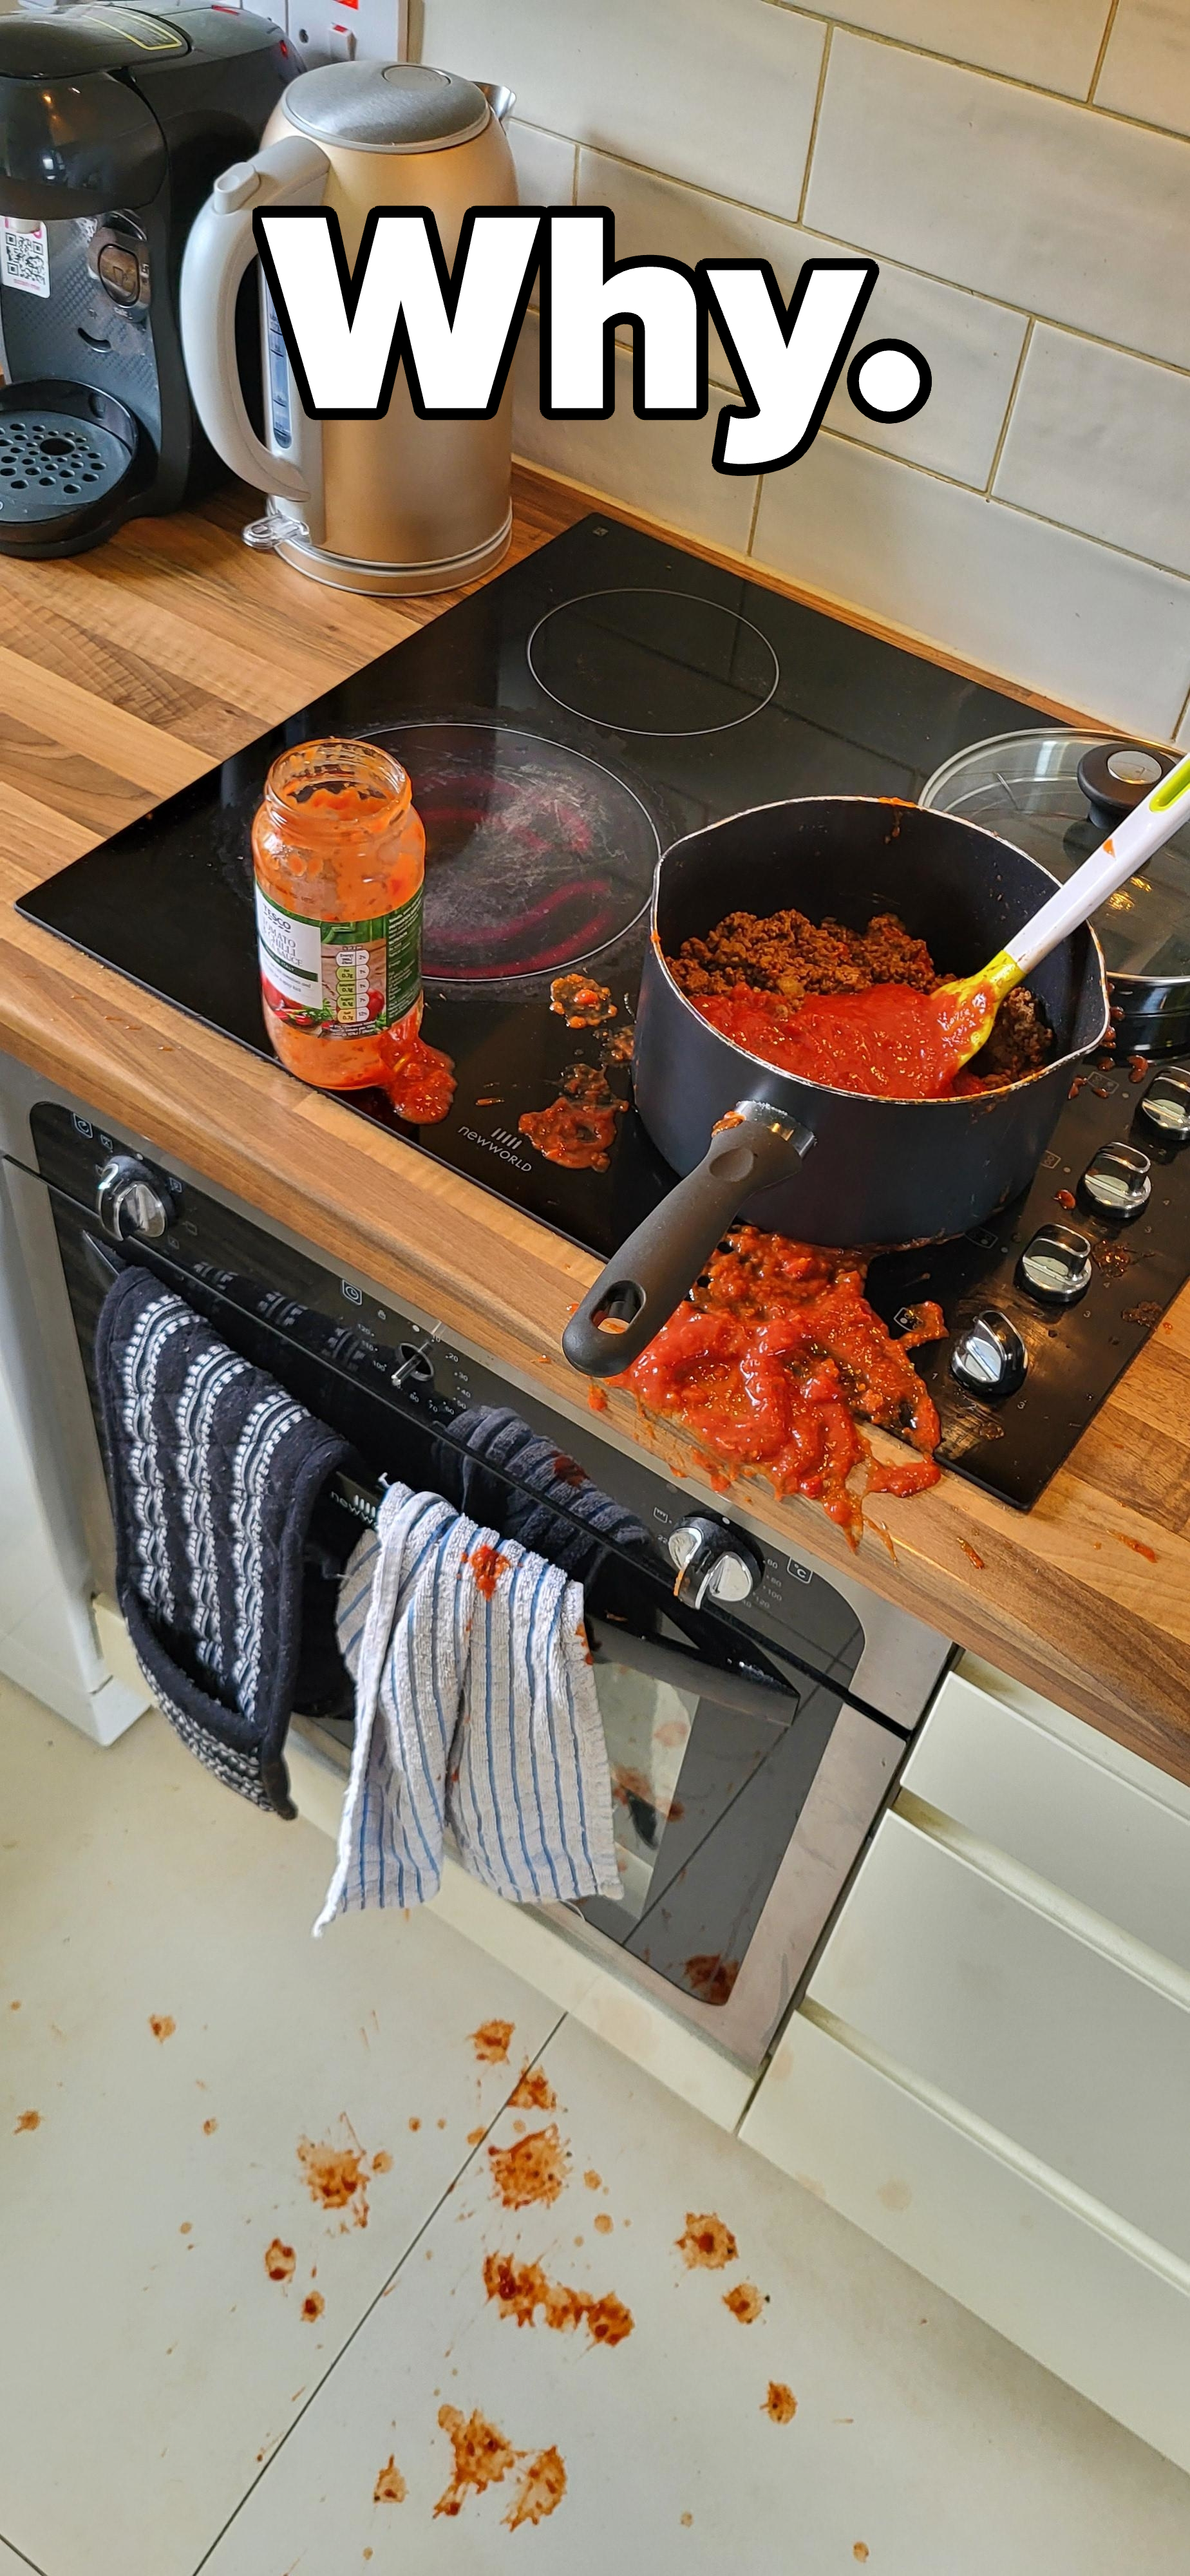 A stovetop with a pot of sauce has spilled, creating a mess on the stove and floor. A jar of sauce is open beside the pot. Towels hang from the oven door